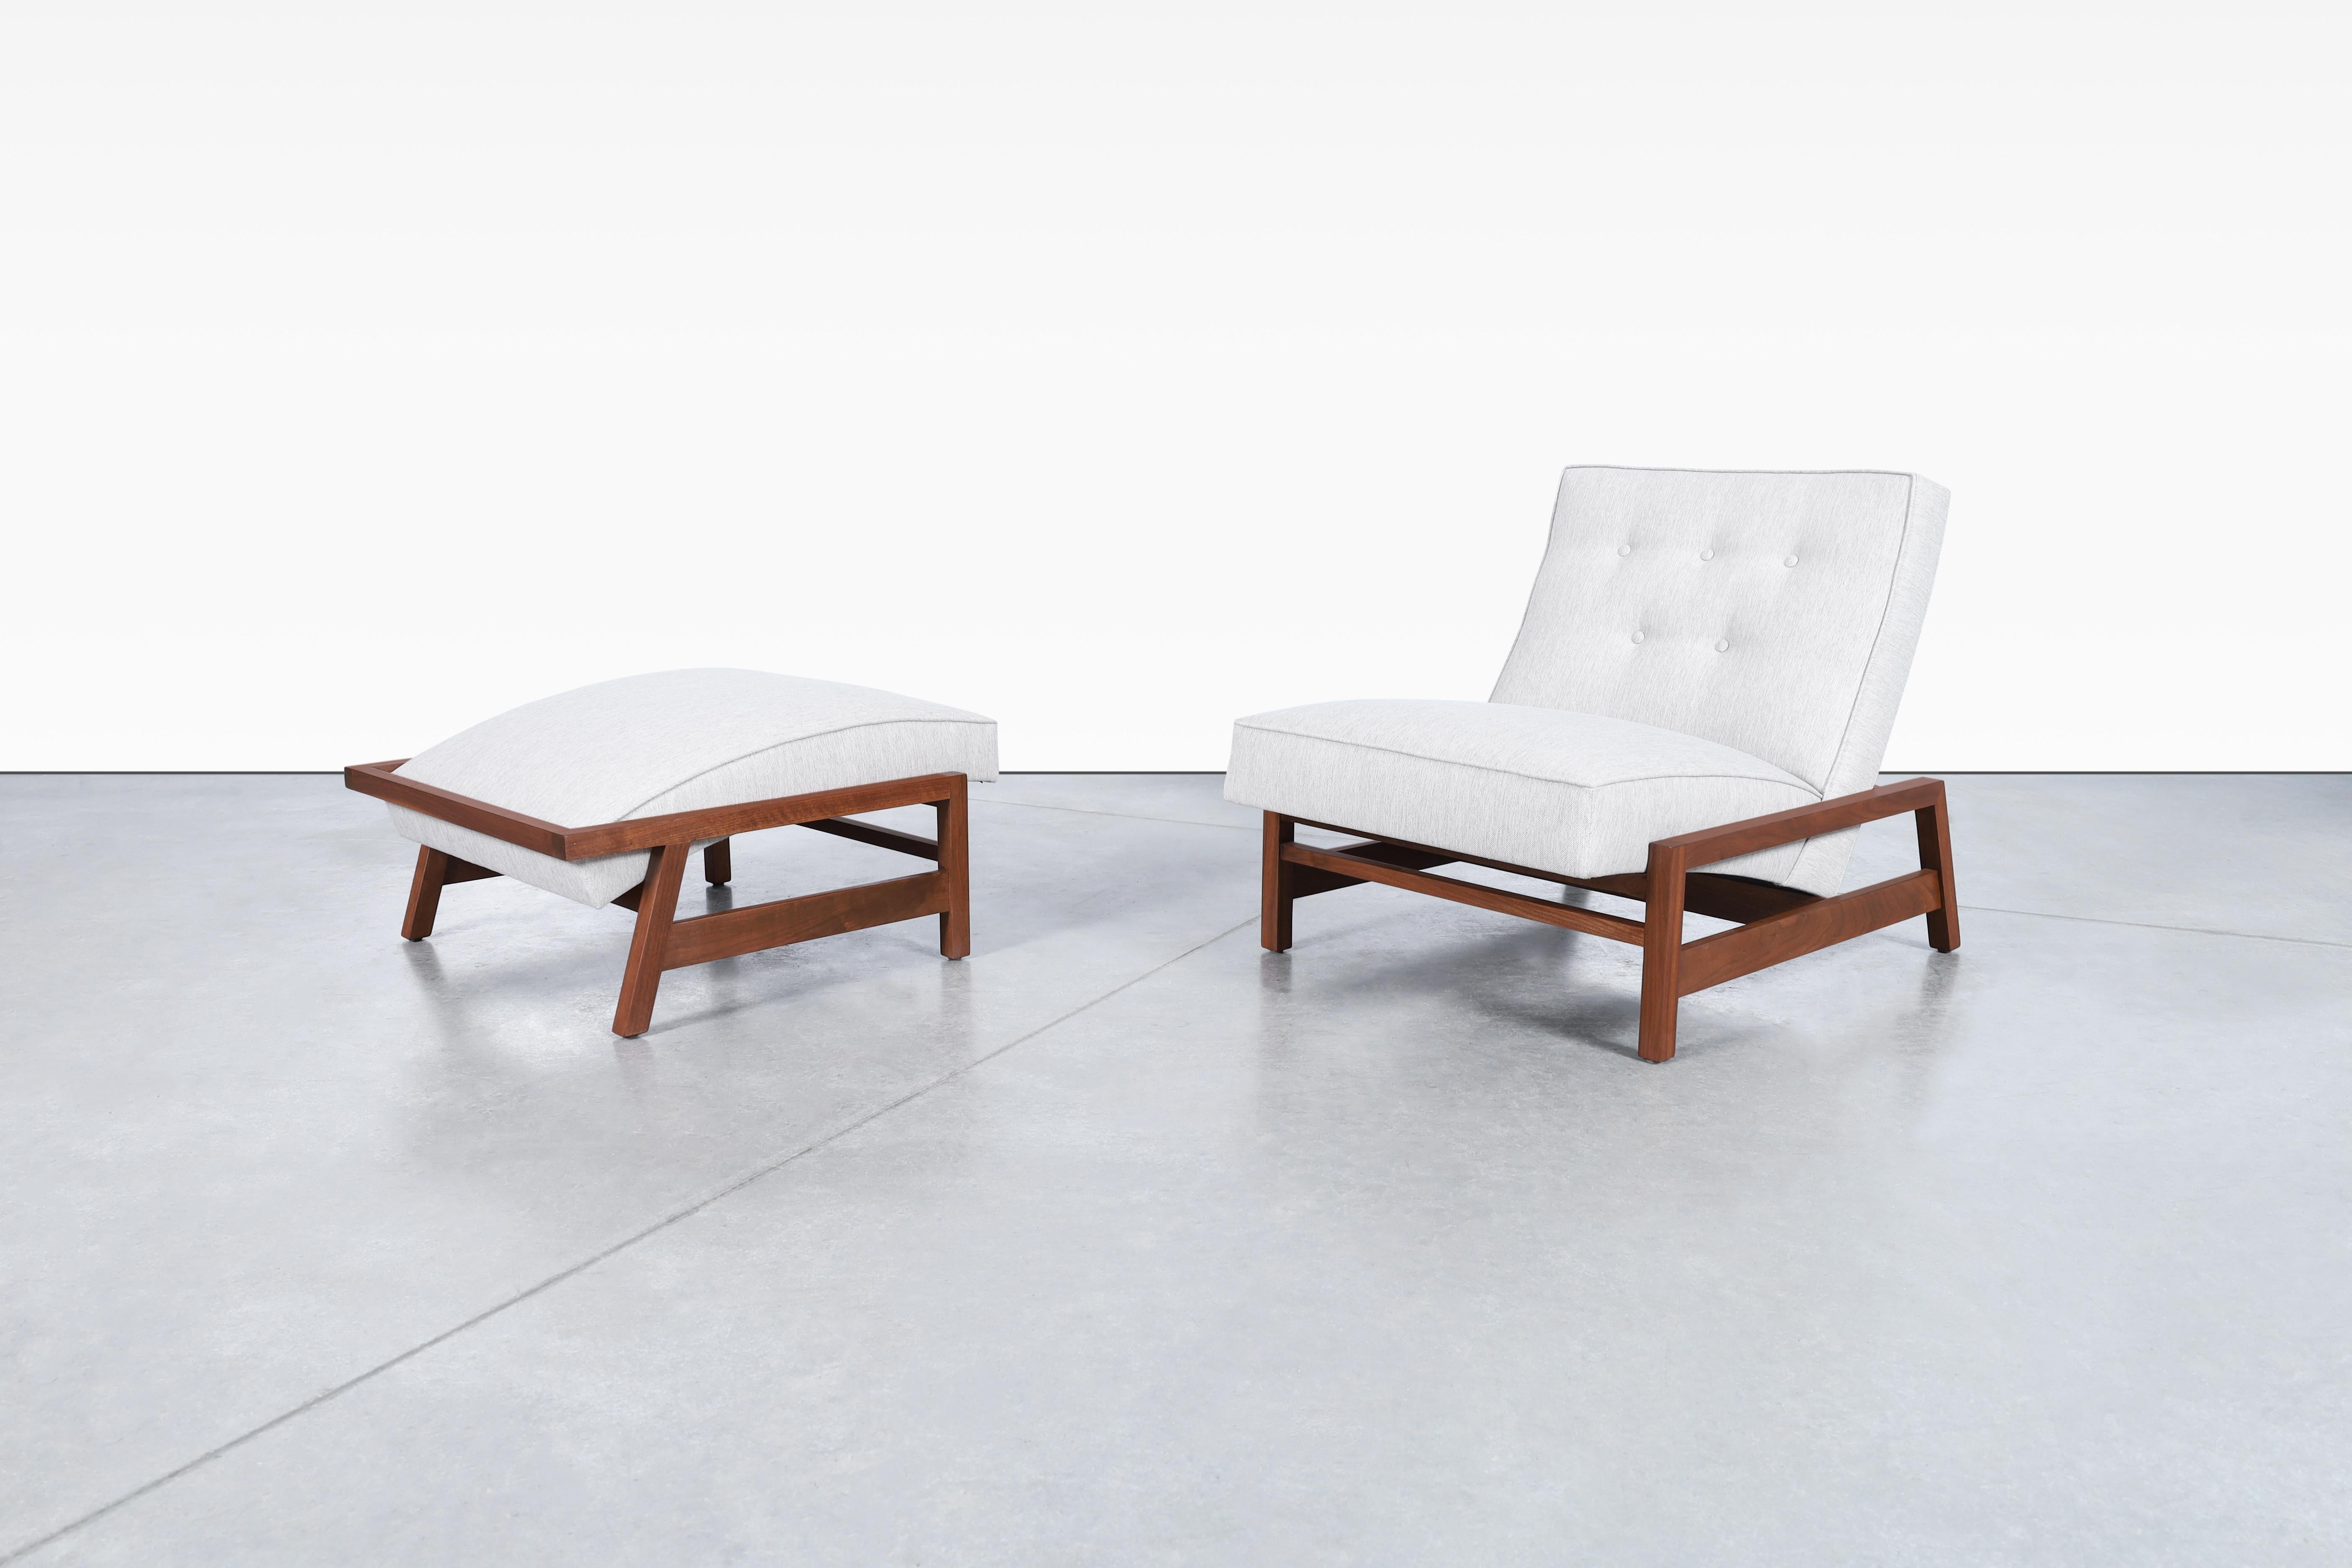 Stunning mid-century walnut lounge chair and ottoman styled after Tobia Scarpa in the United States, circa 1960s. With the essence of Scarpa's design philosophy, this chair and ottoman have been refinished and reupholstered to breathe new life into